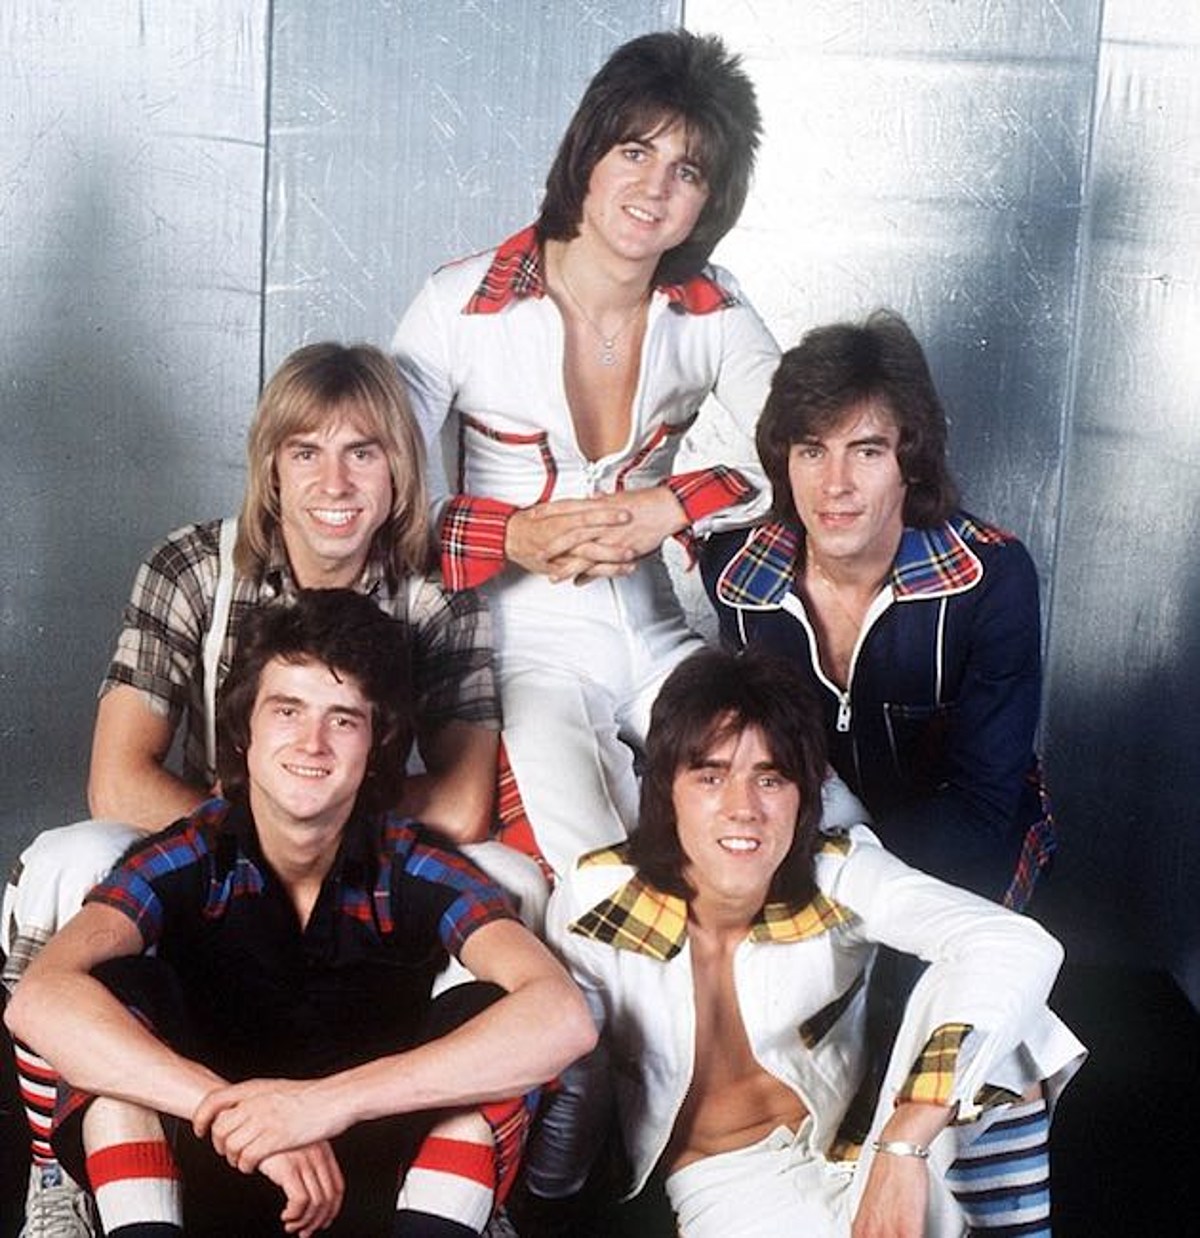 70s glam teen sensations The Bay City Rollers reformed, plotting UK  tour…and want to play Madison Square Garden